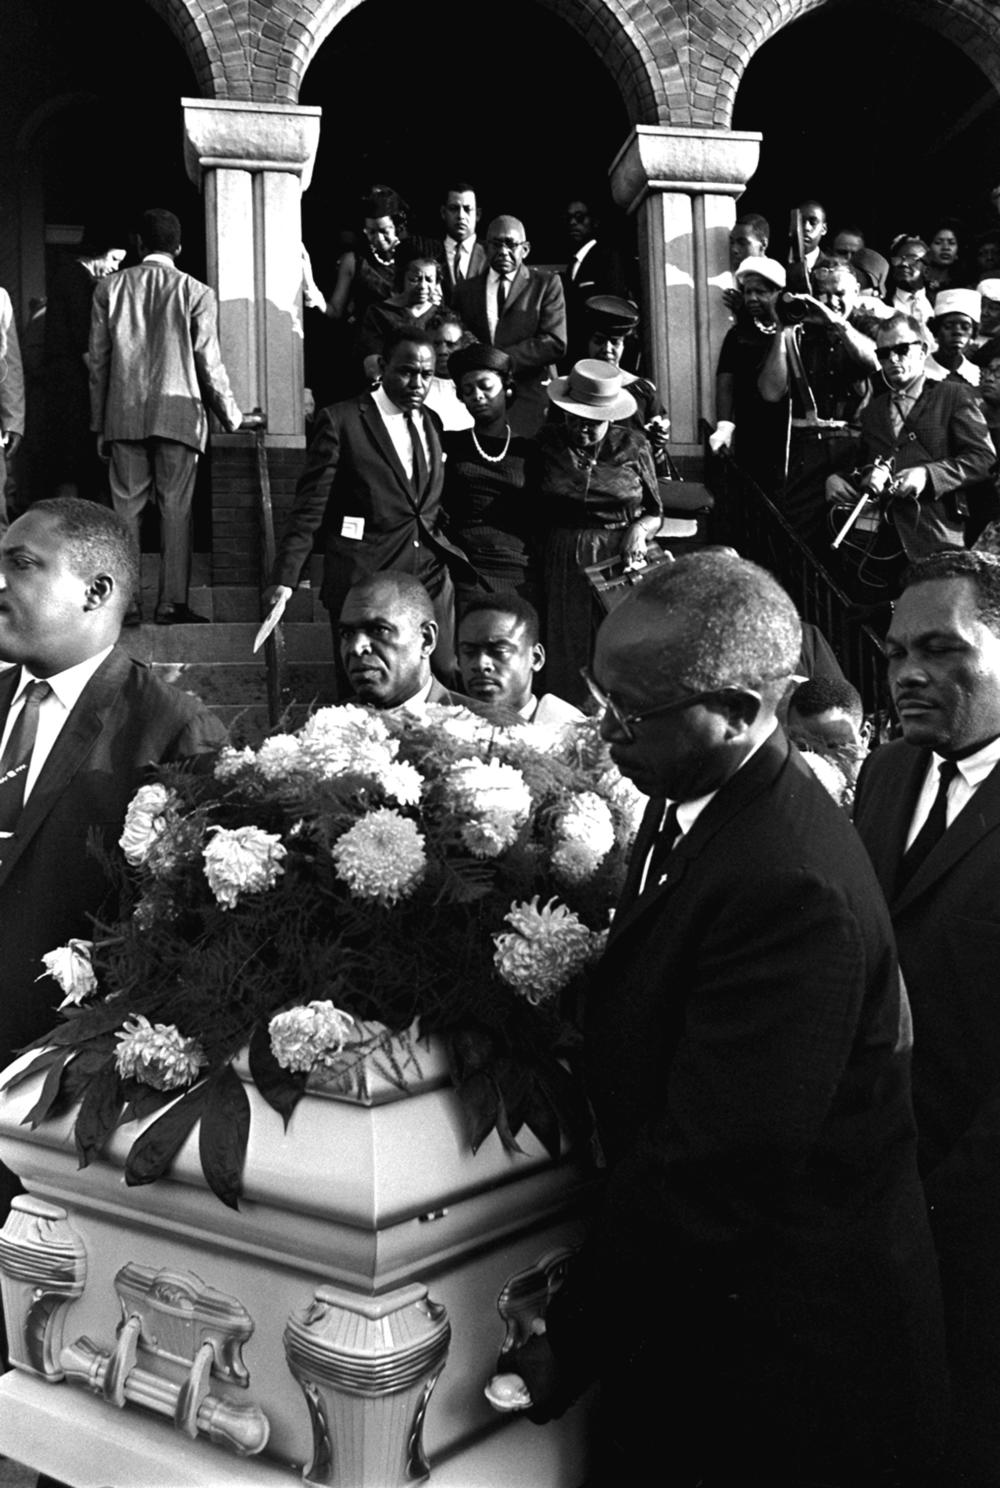 Christopher McNair (center left), and Maxine McNair (right) parents of Denise McNair, follow her coffin during her funeral in Birmingham, Ala., in 1963.